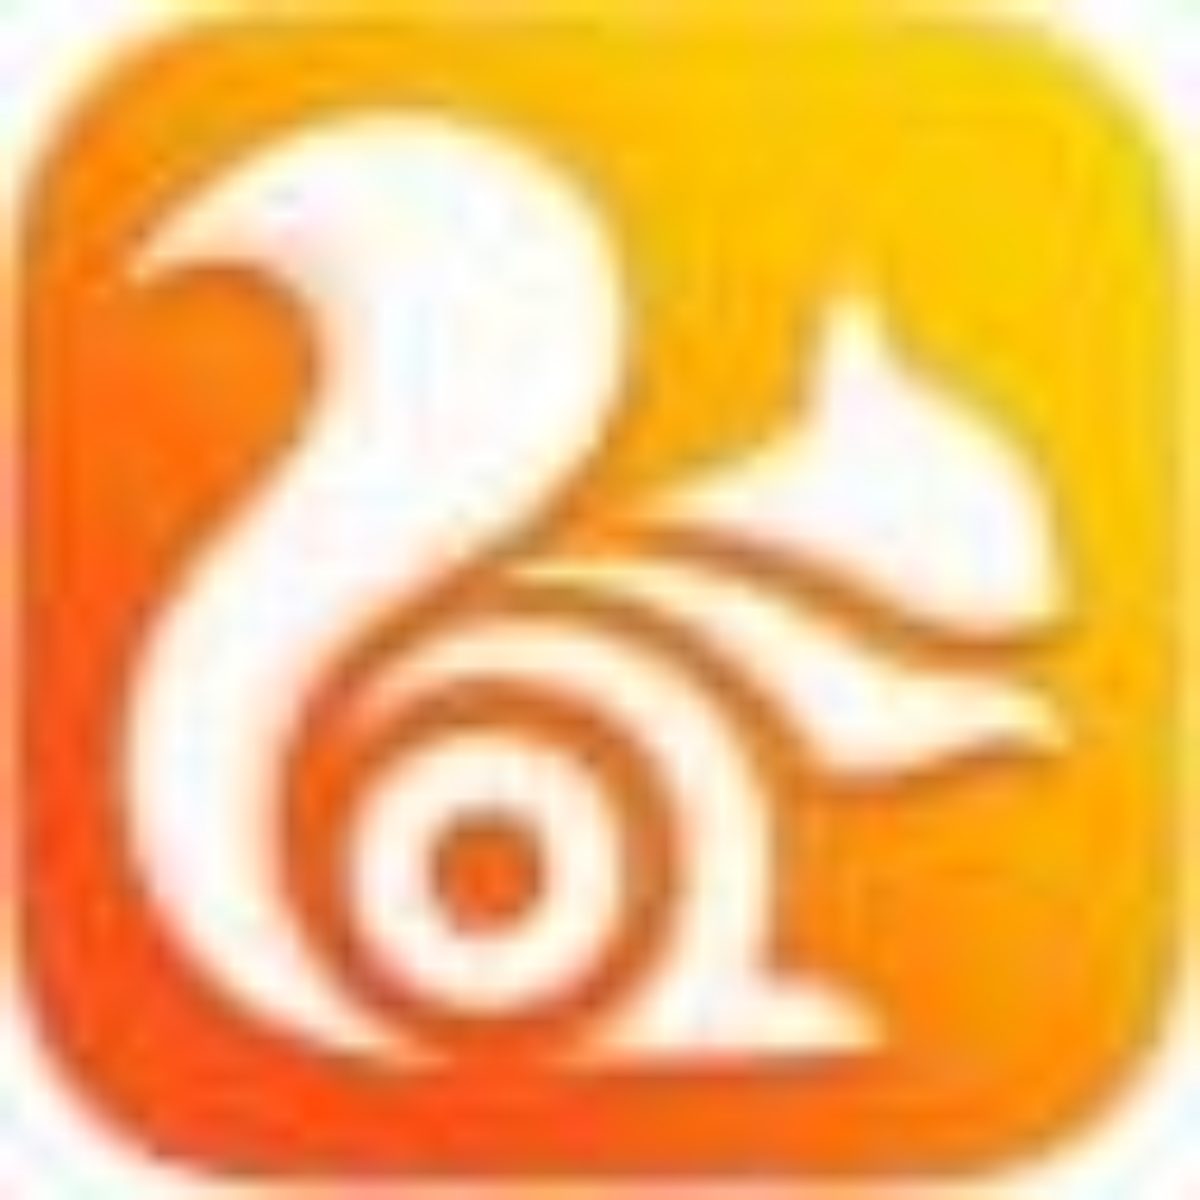 Uc Browser For Pc Download 2020 Windows 7 10 8 32 64 Bit